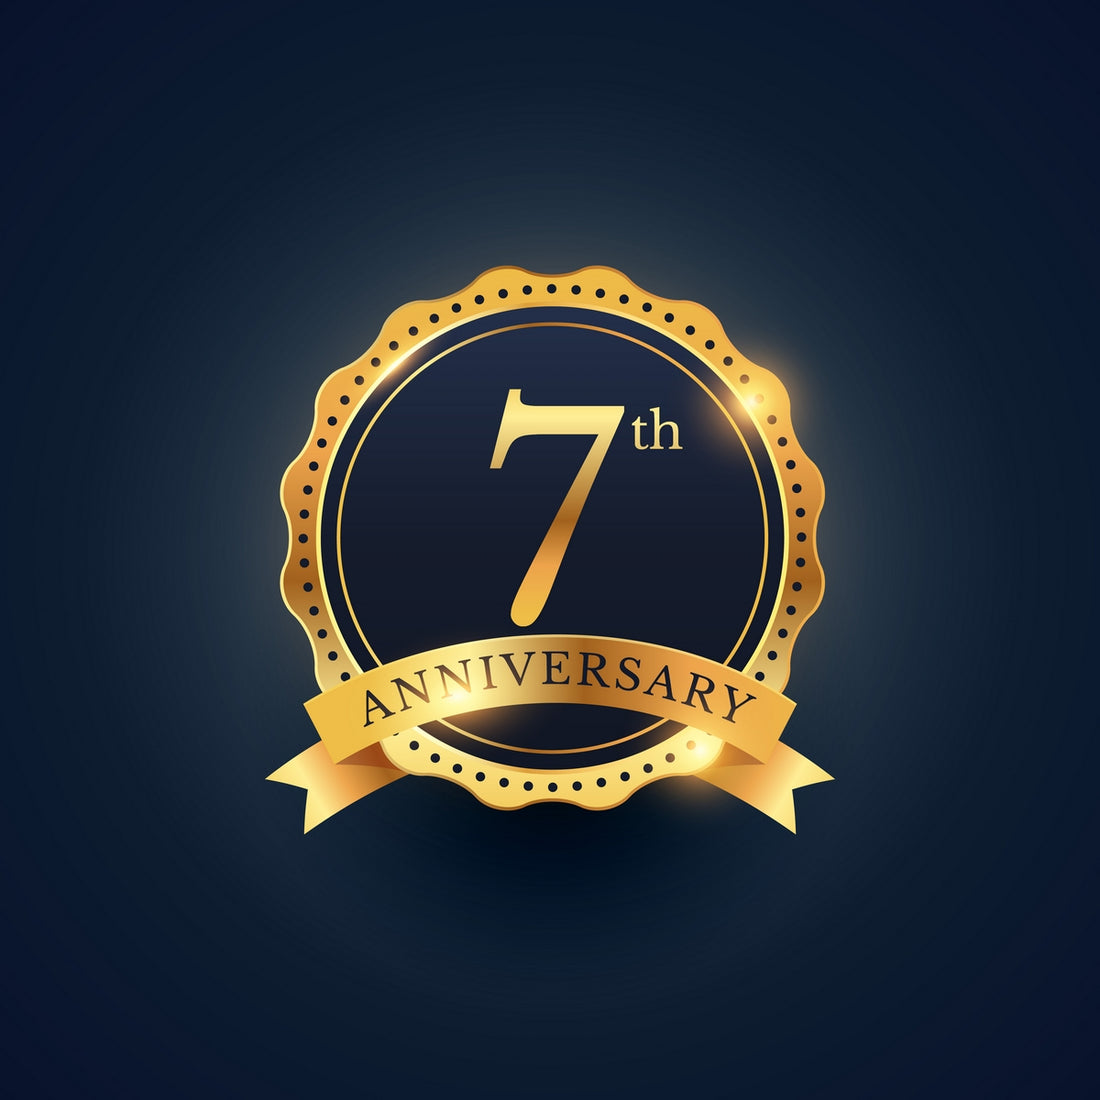 7th Anniversary Celebrations - come join us Saturday November 19th-December 1st